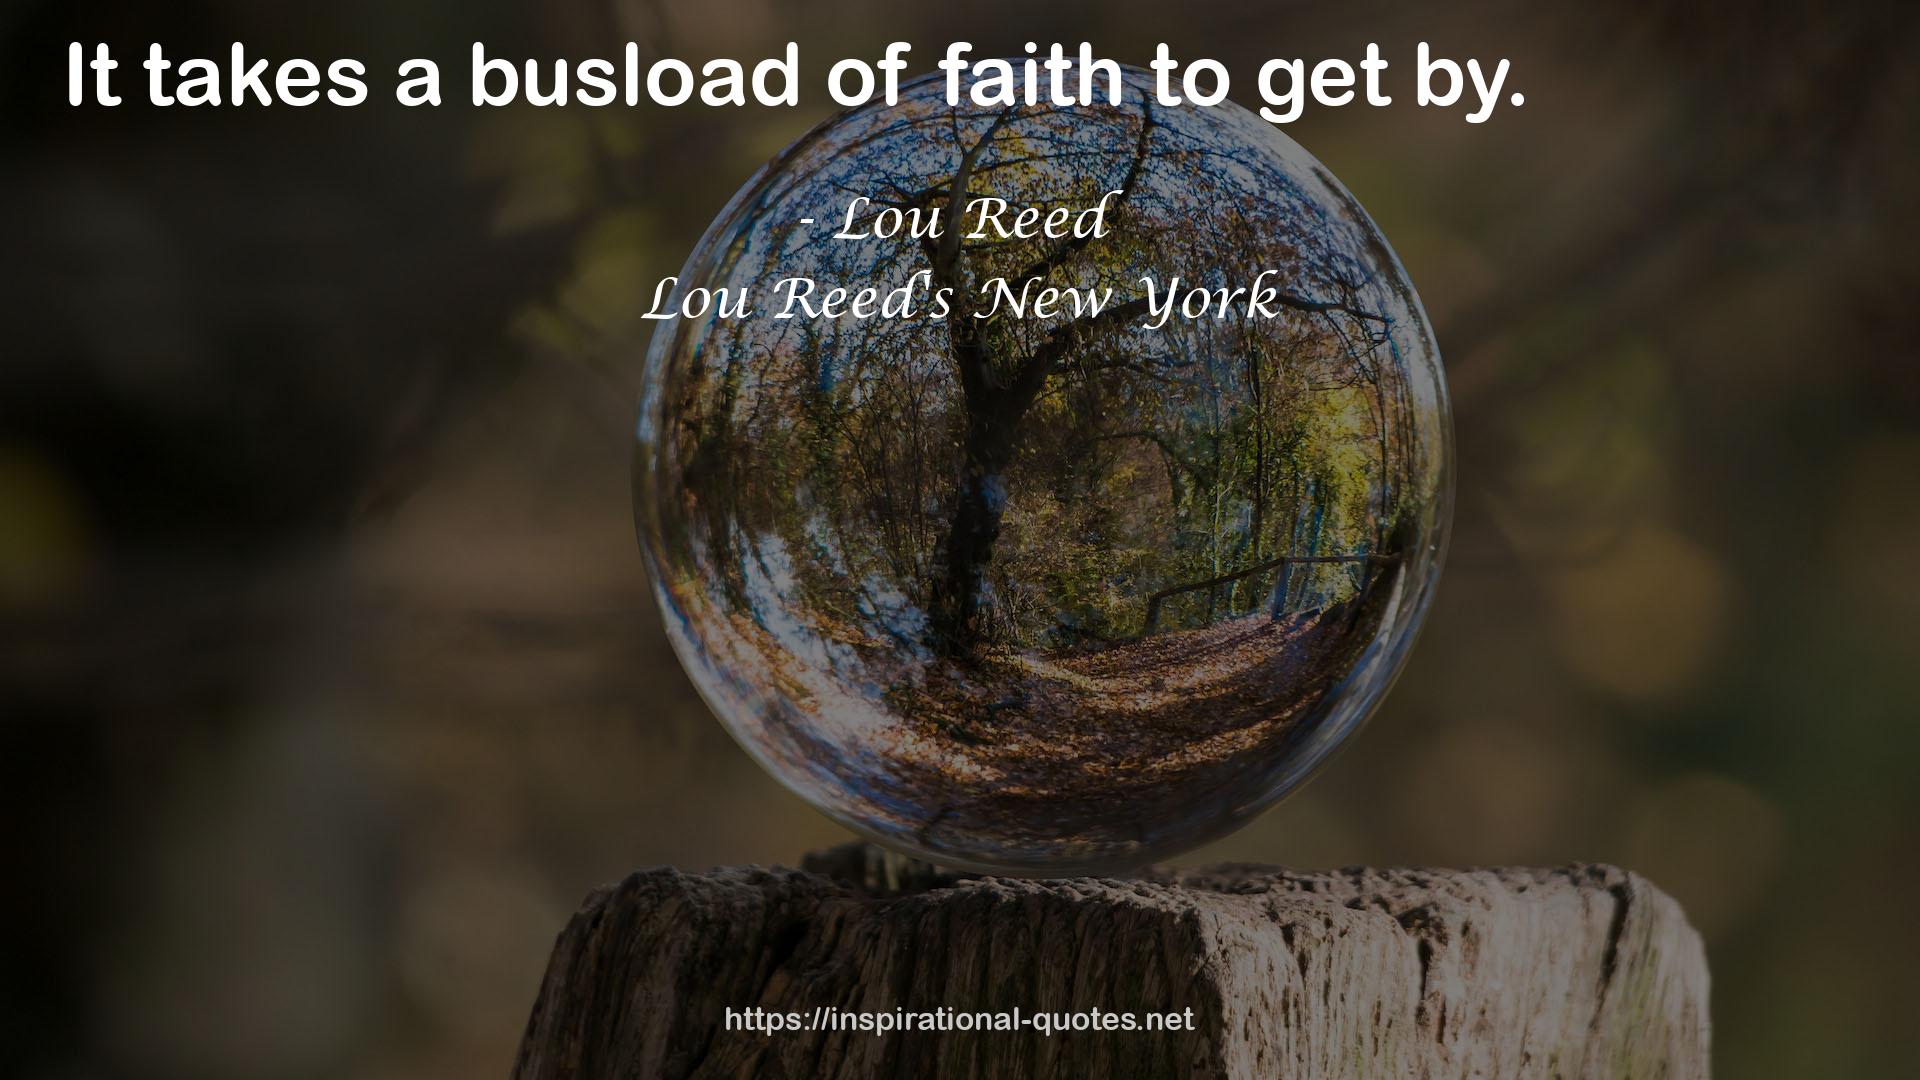 Lou Reed's New York QUOTES